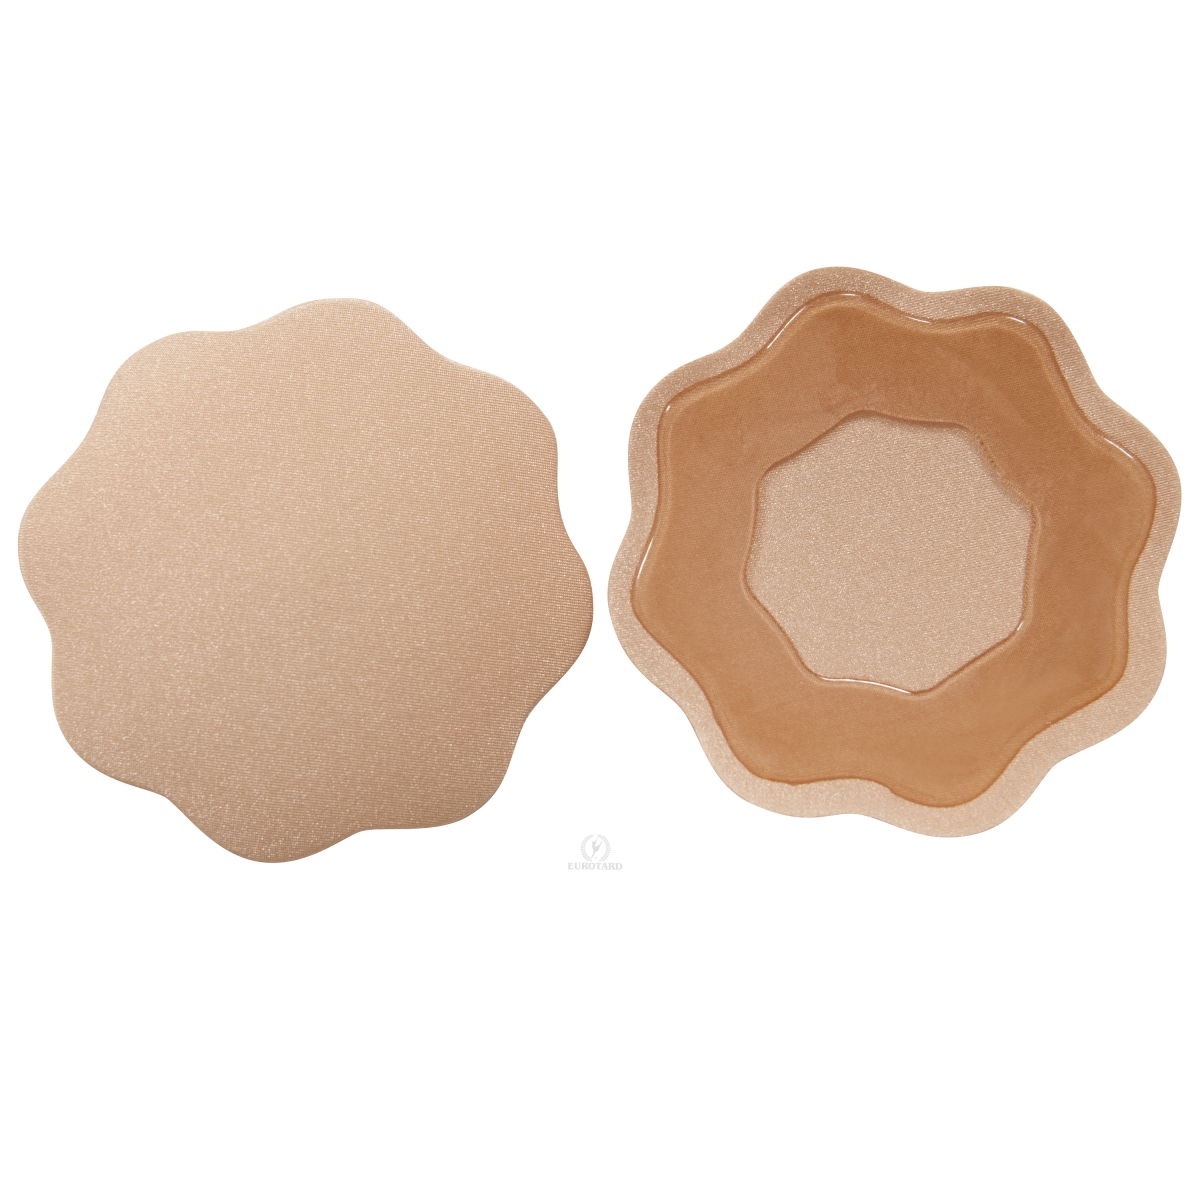 Picture of EuroSkins JE98-N-OSFA Enhance Foam Modesty Petals Nipple Cover, Nude - One Size Fits All